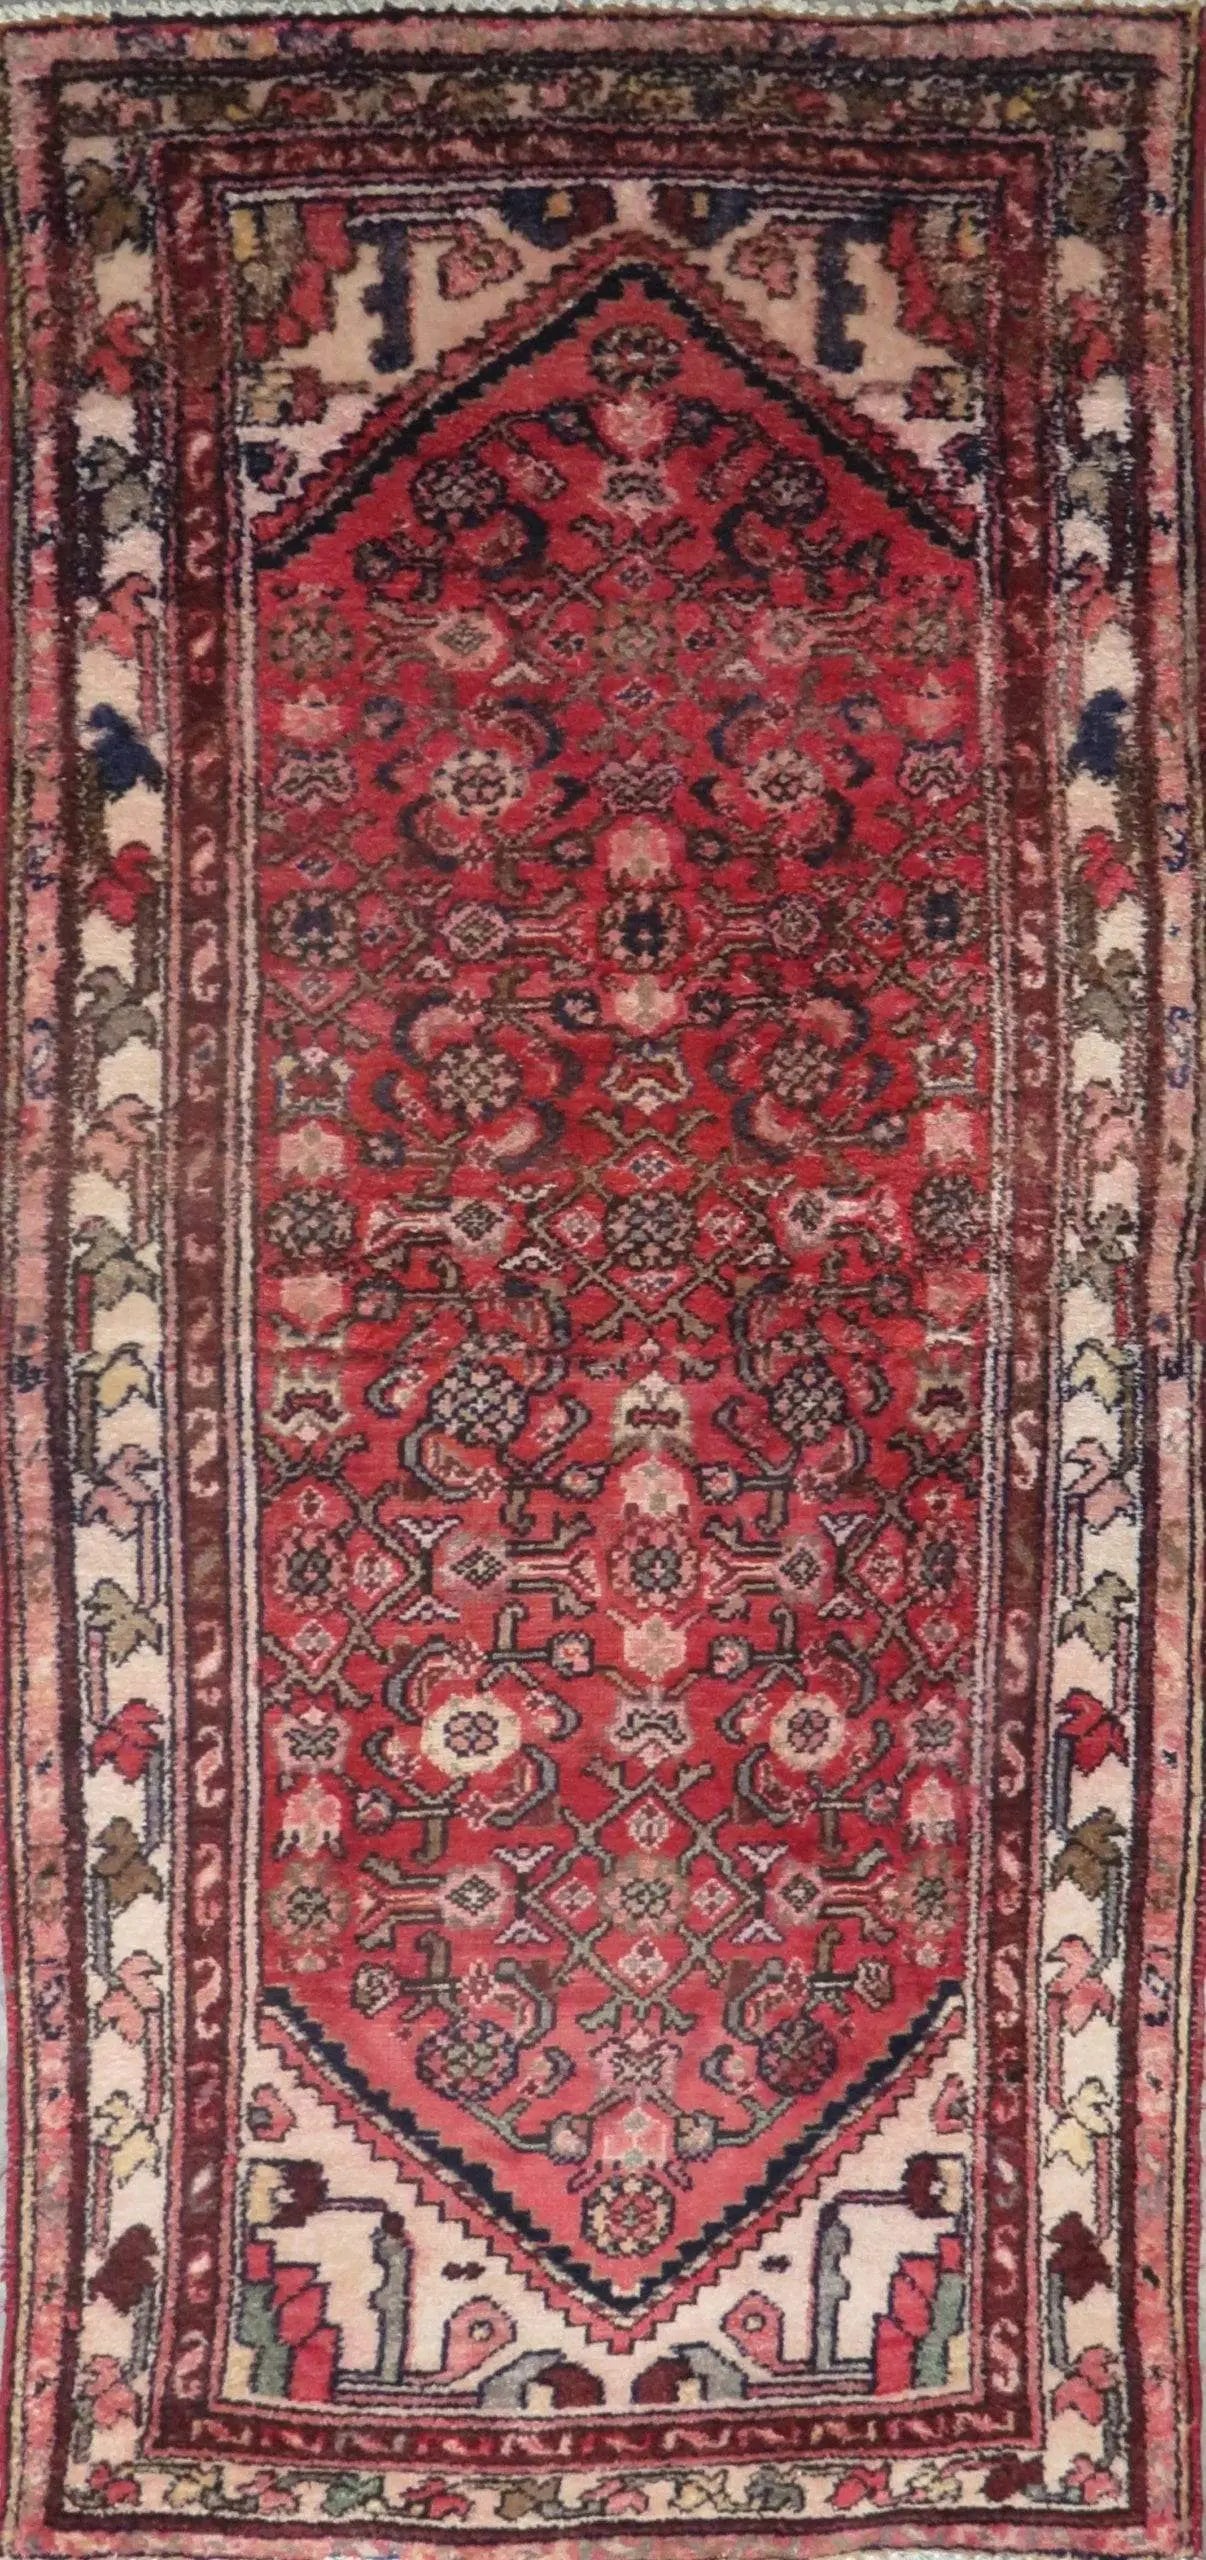 Hand-Knotted Persian Wool Rug _ Luxurious Vintage Design, 6'6" x 2'10", Artisan Crafted